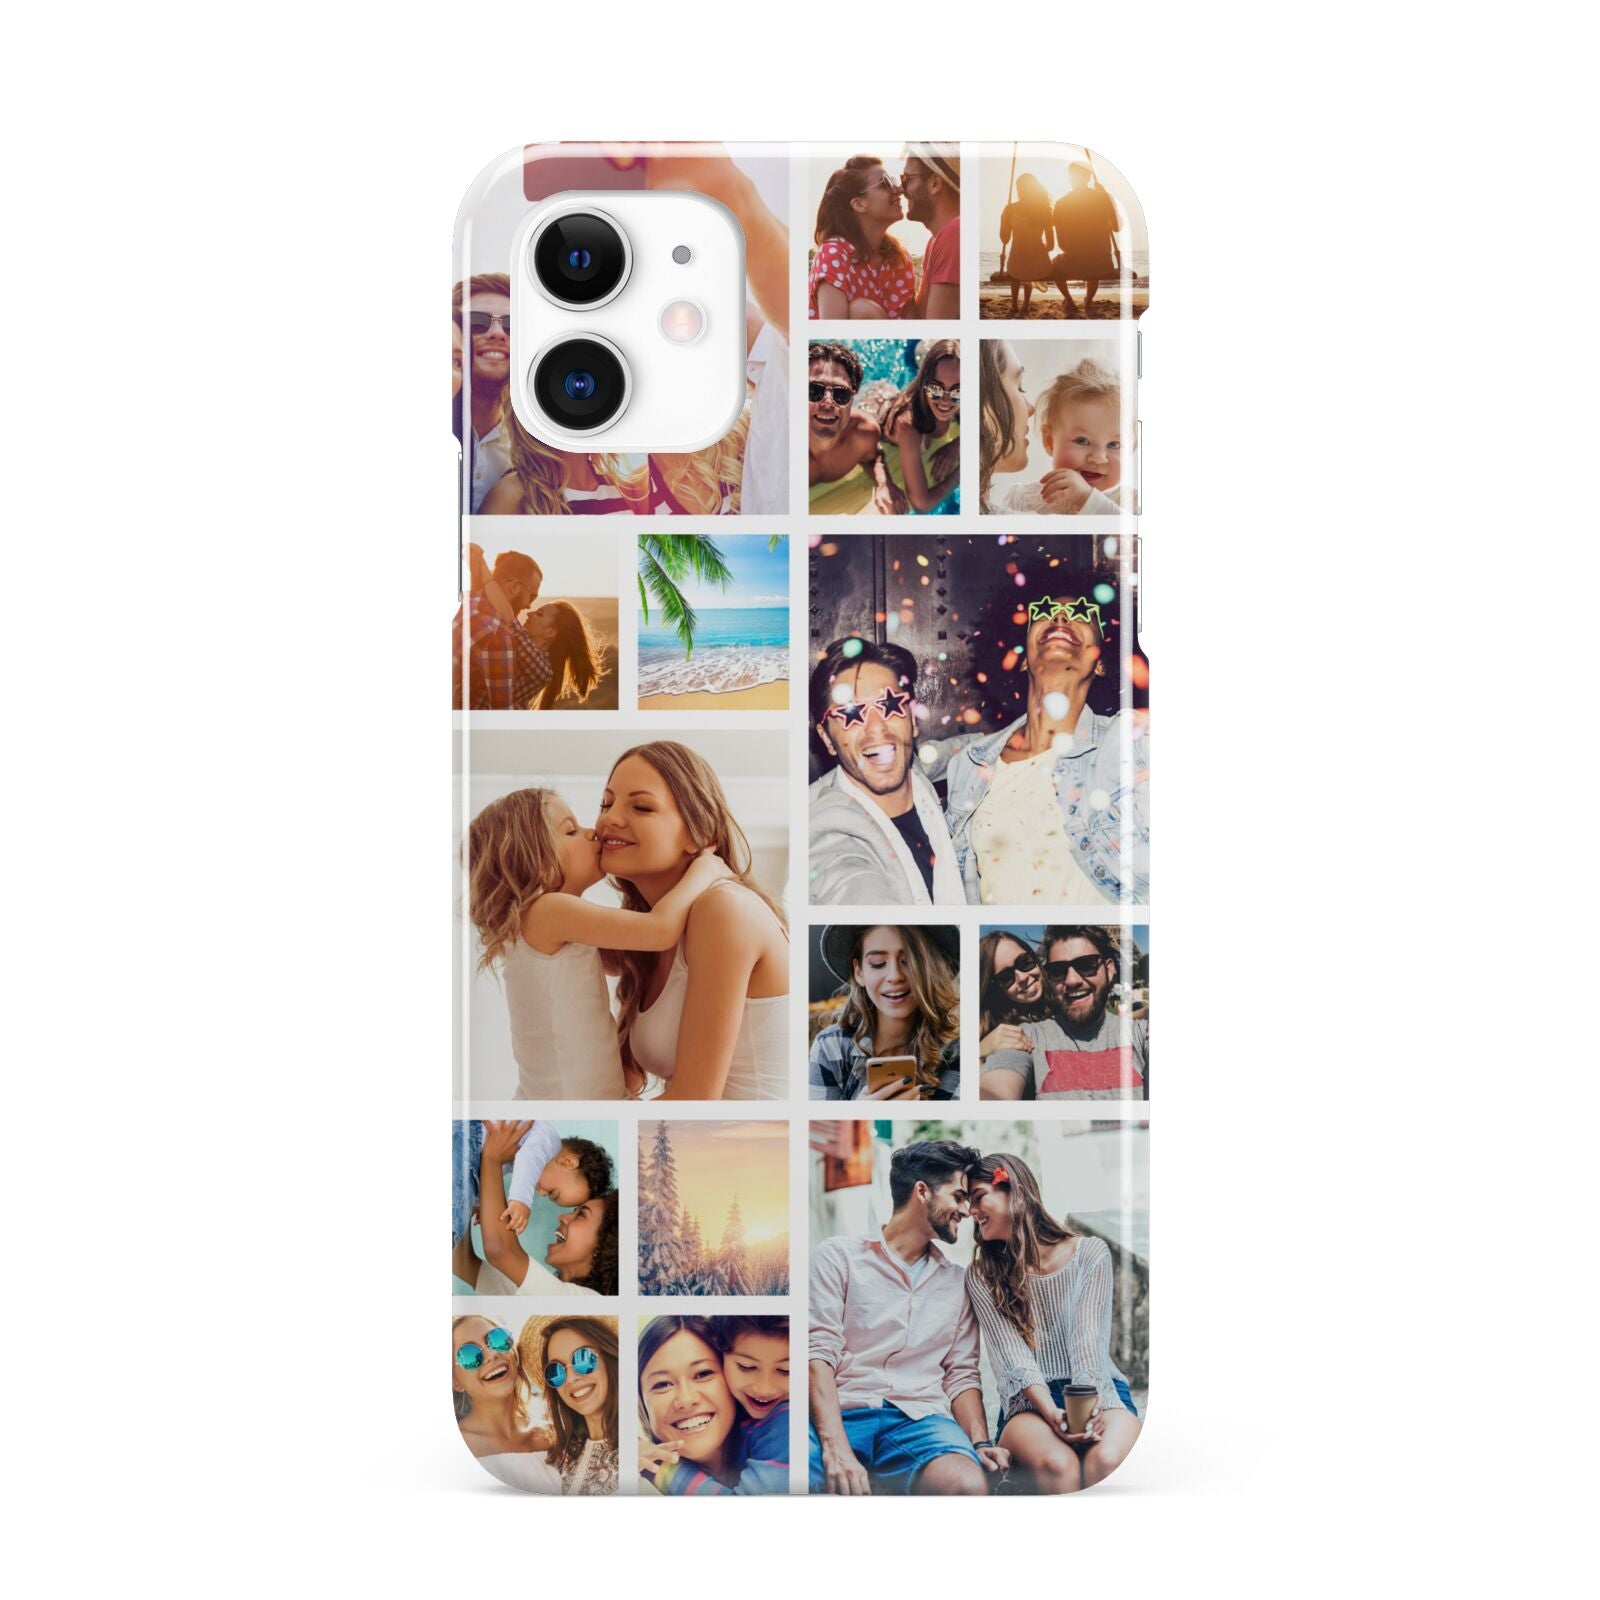 Abstract Multi Tile Photo Montage Upload iPhone 11 3D Snap Case